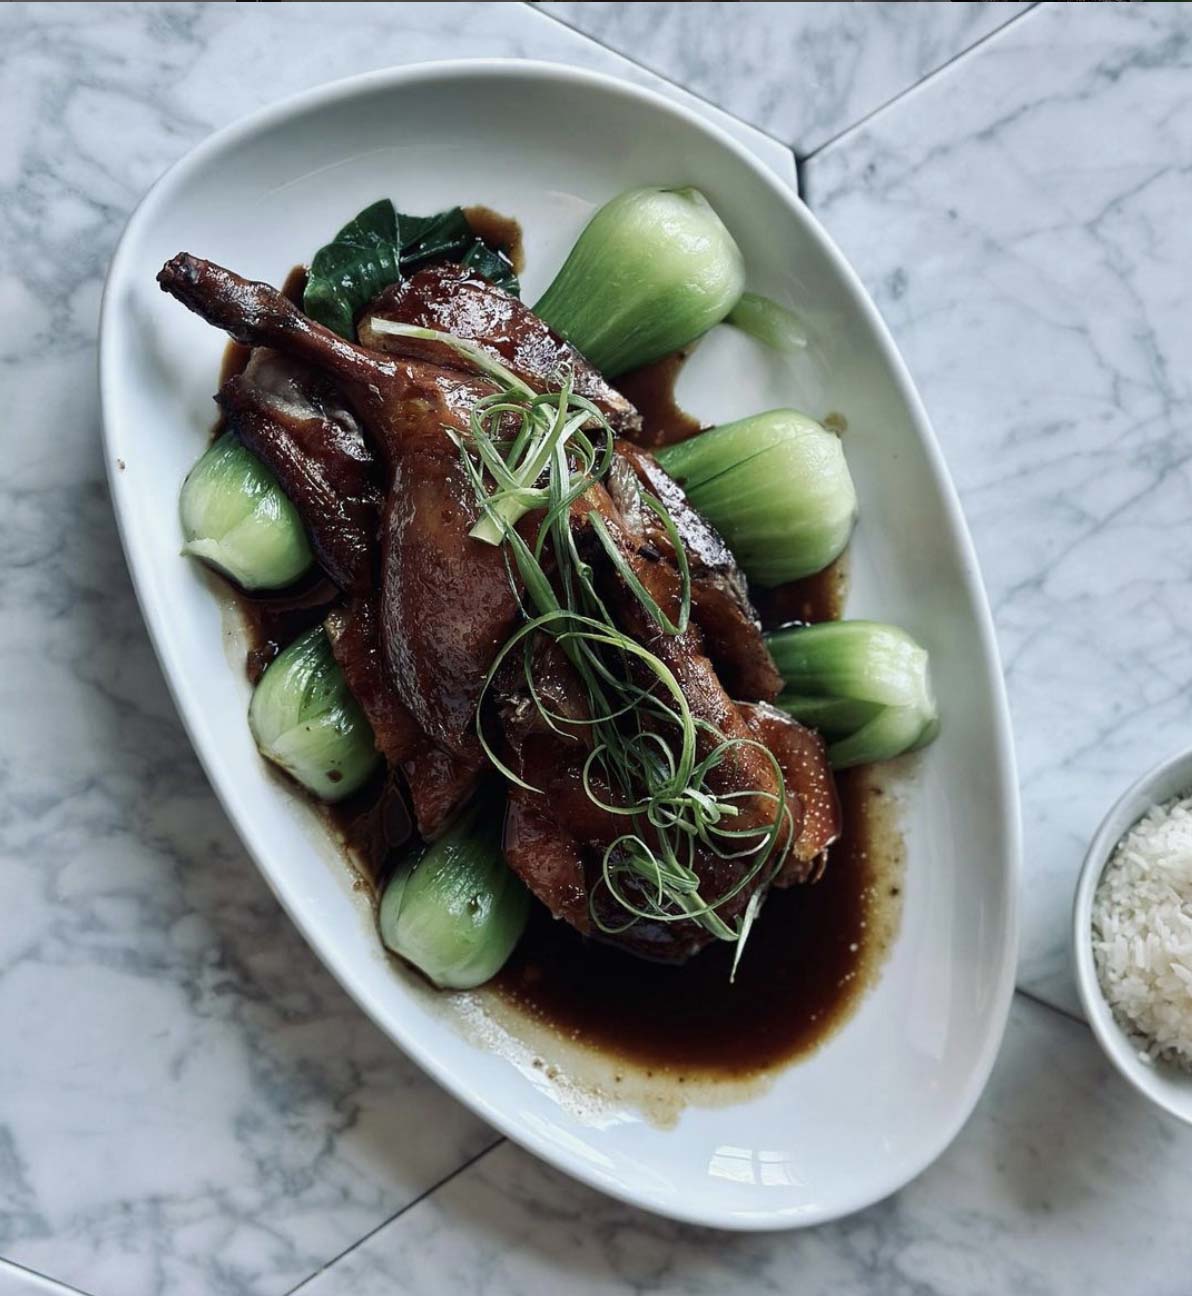 Half duck, served with baby bok choy 